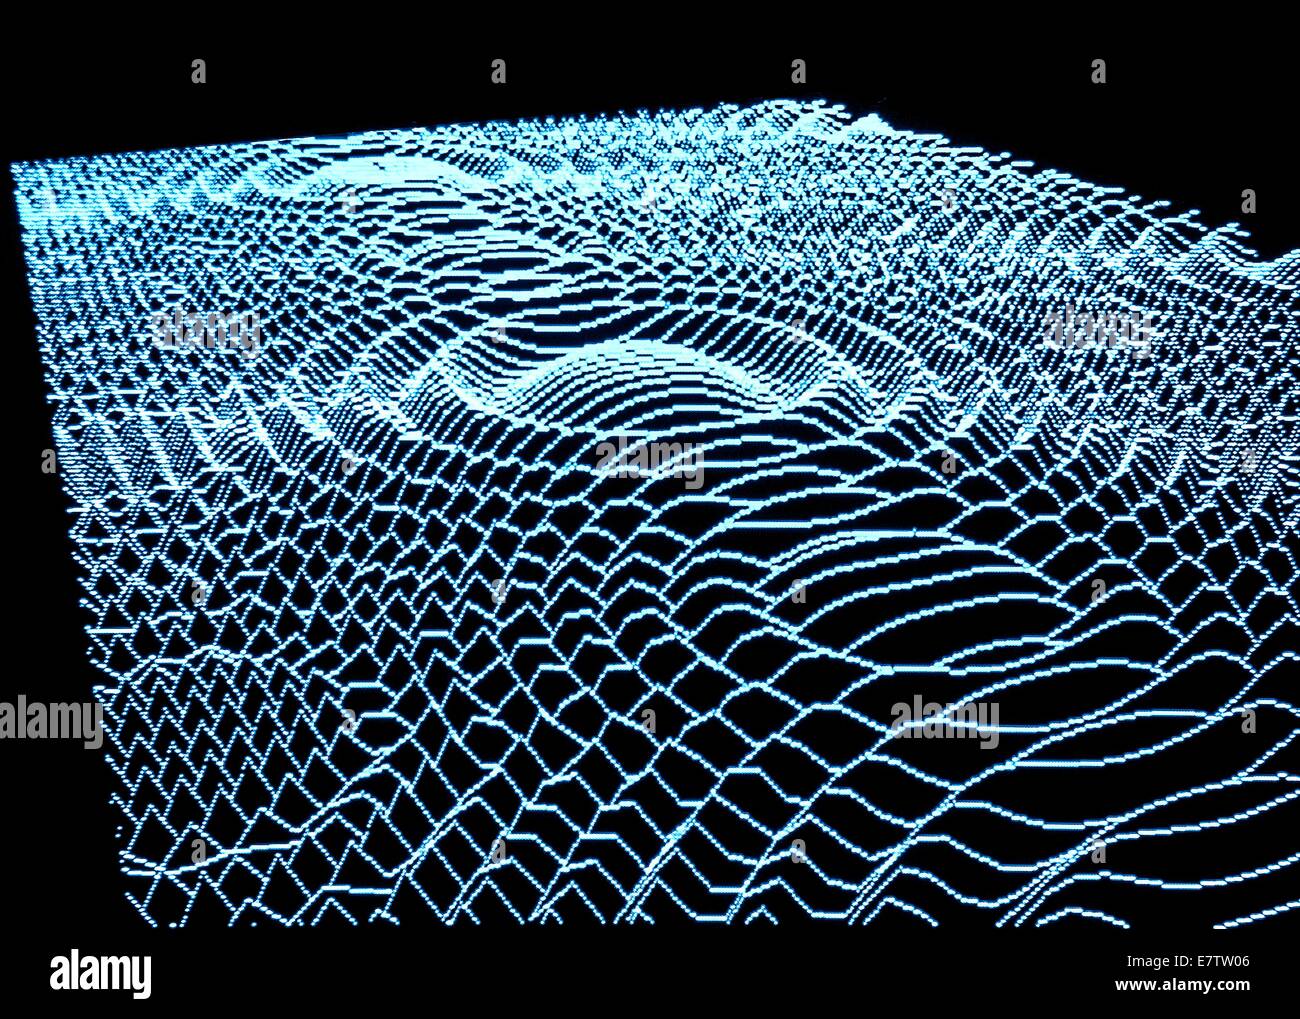 Interference patterns. Computer artwork showing sets of circular waves interacting with each other. At the point where a wave peak from one hits a wave peak from another, or a trough hits a trough, they reinforce each other; their magnitudes are summed. T Stock Photo